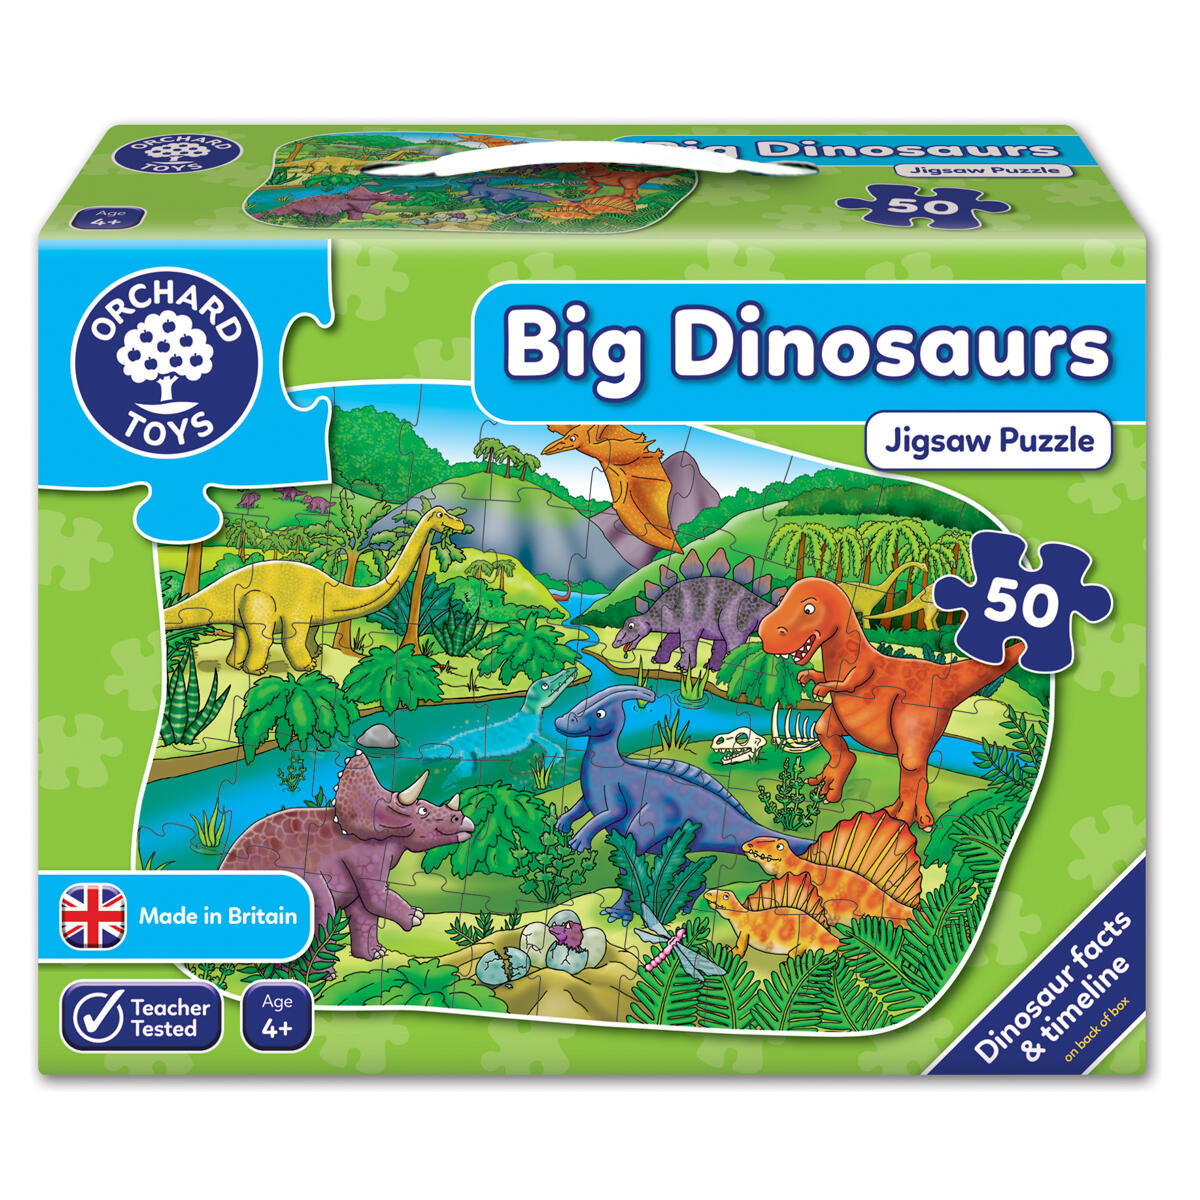 View the best prices for: orchard toys big dinosaurs jigsaw puzzle 50 piece